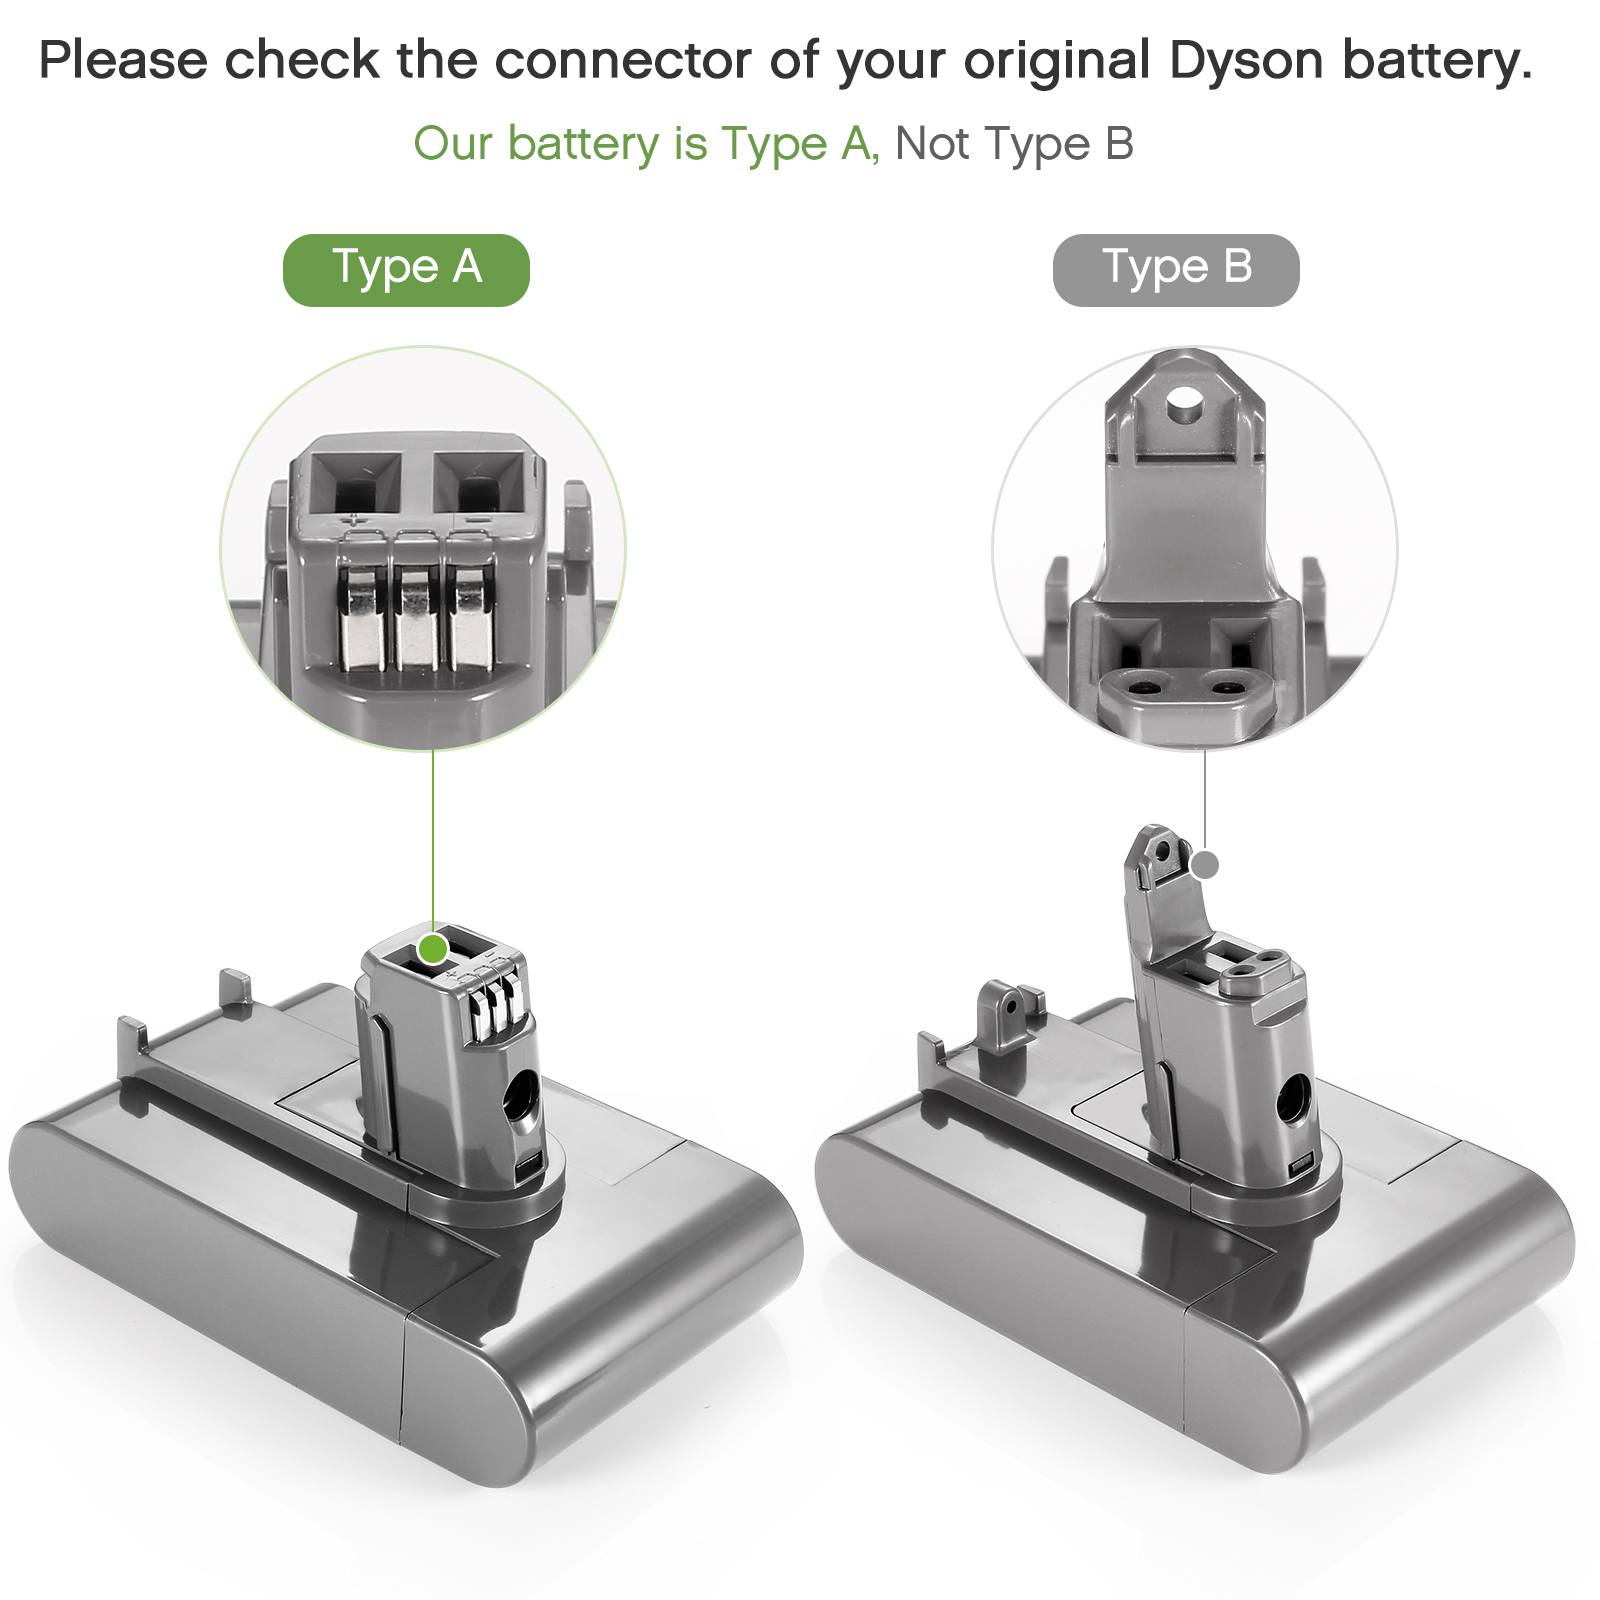 31A Battery Adapter for Dyson Type A DC31 DC35 DC34 Vacuum Cleaner, adapter Convert for 20V Lithium Battery